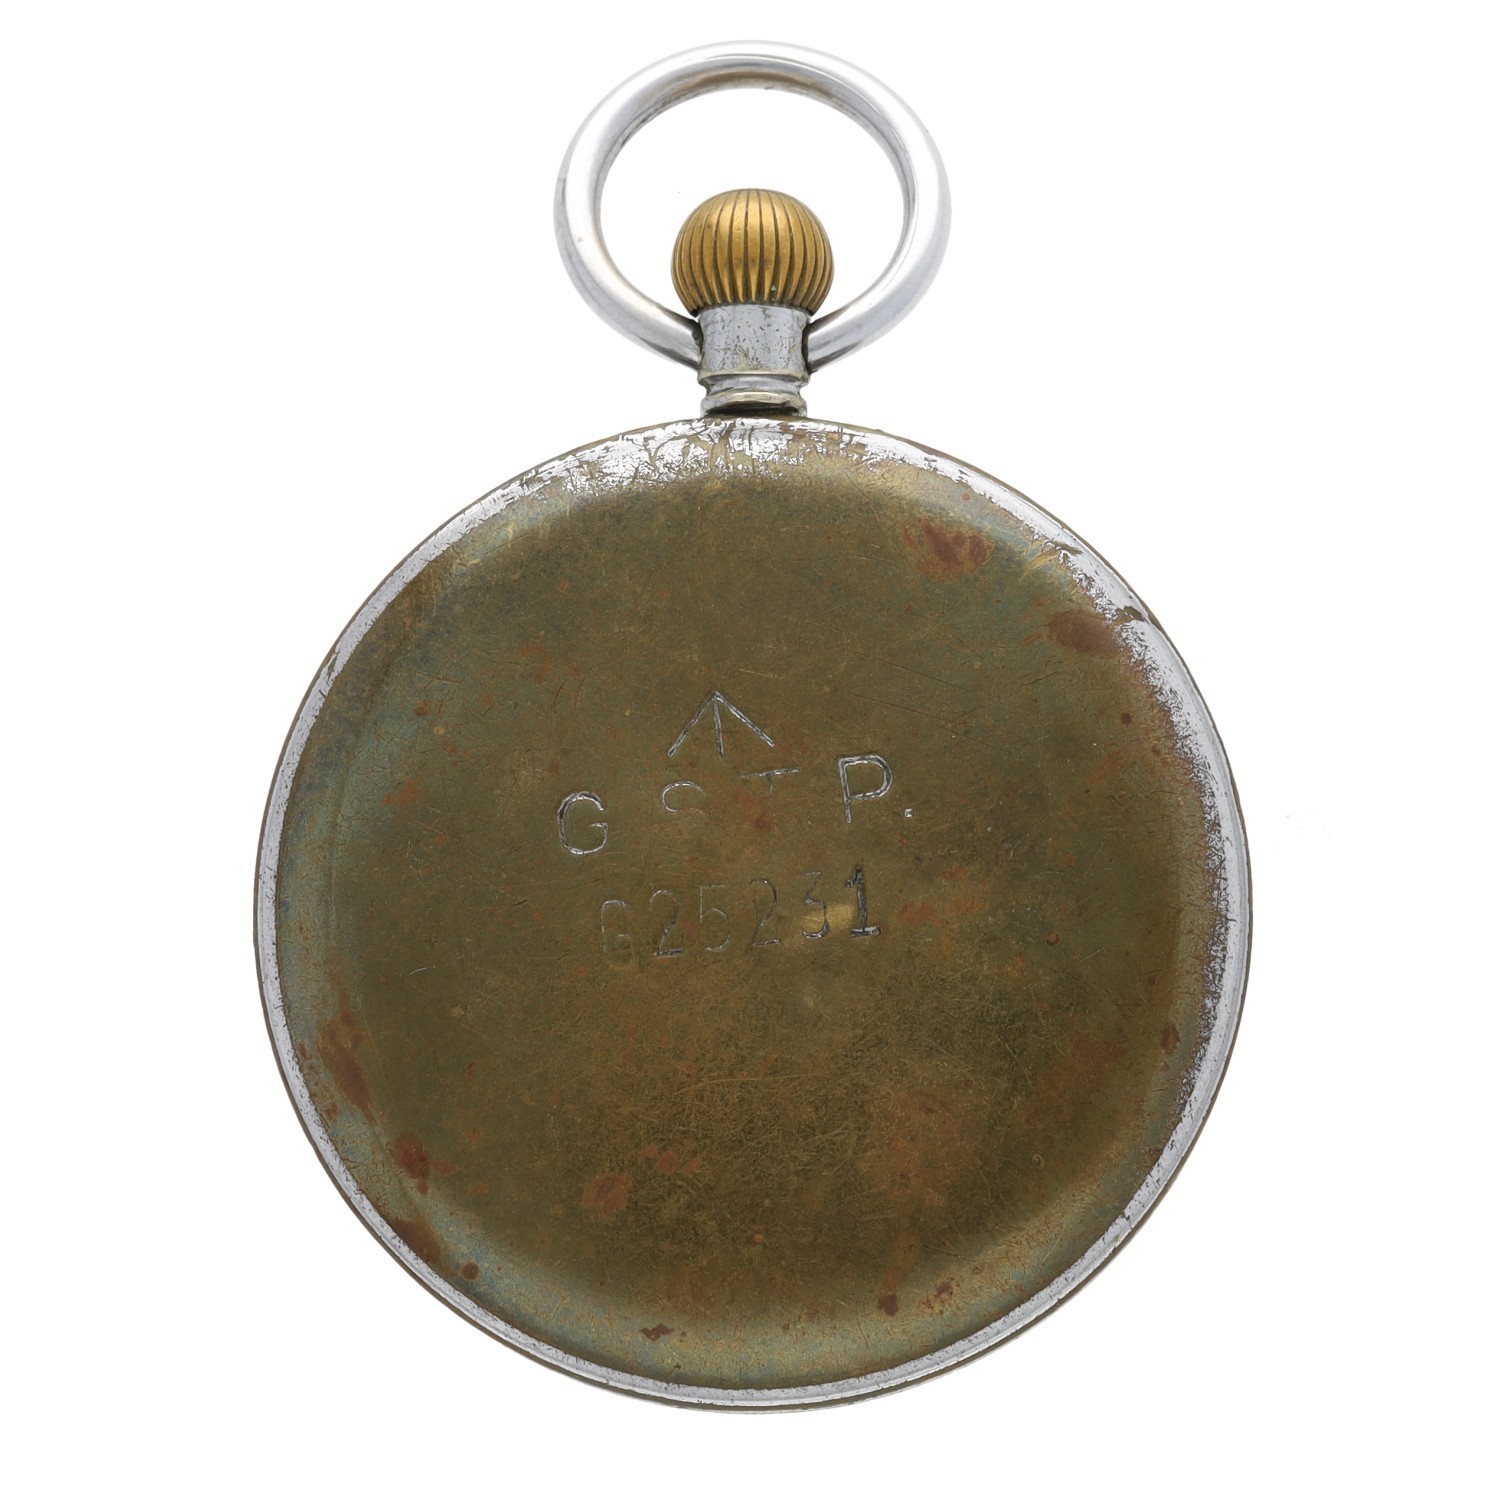 Helvetia WWII British Military Army issue nickel cased lever pocket watch, cal. 32A movement - Image 3 of 4